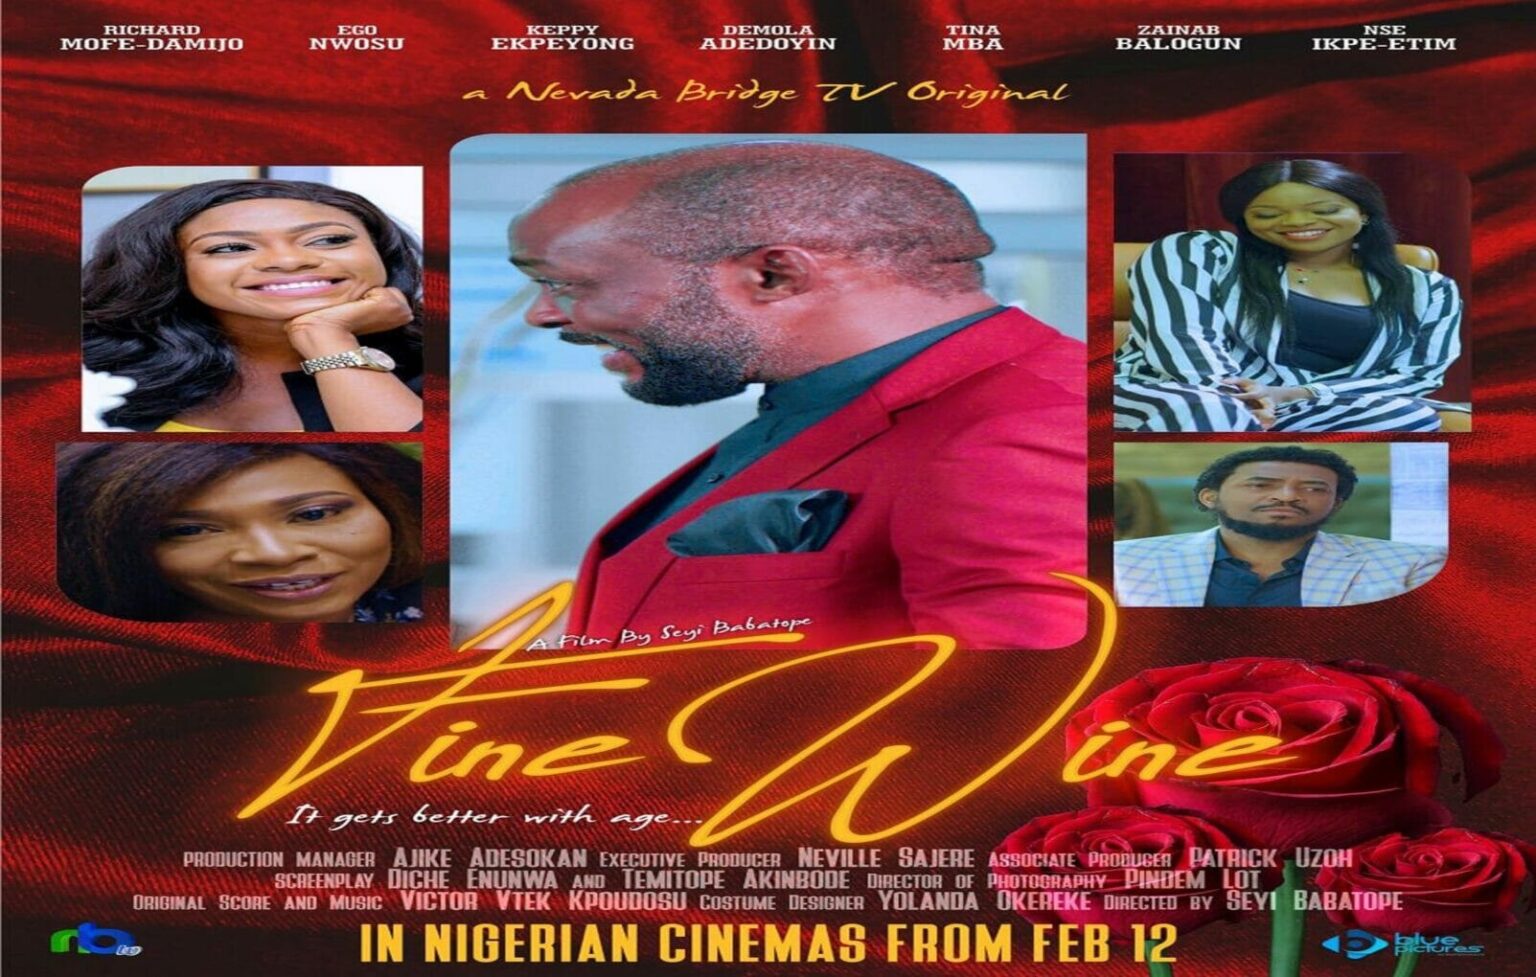 MOVIE REVIEW: Is "Fine Wine